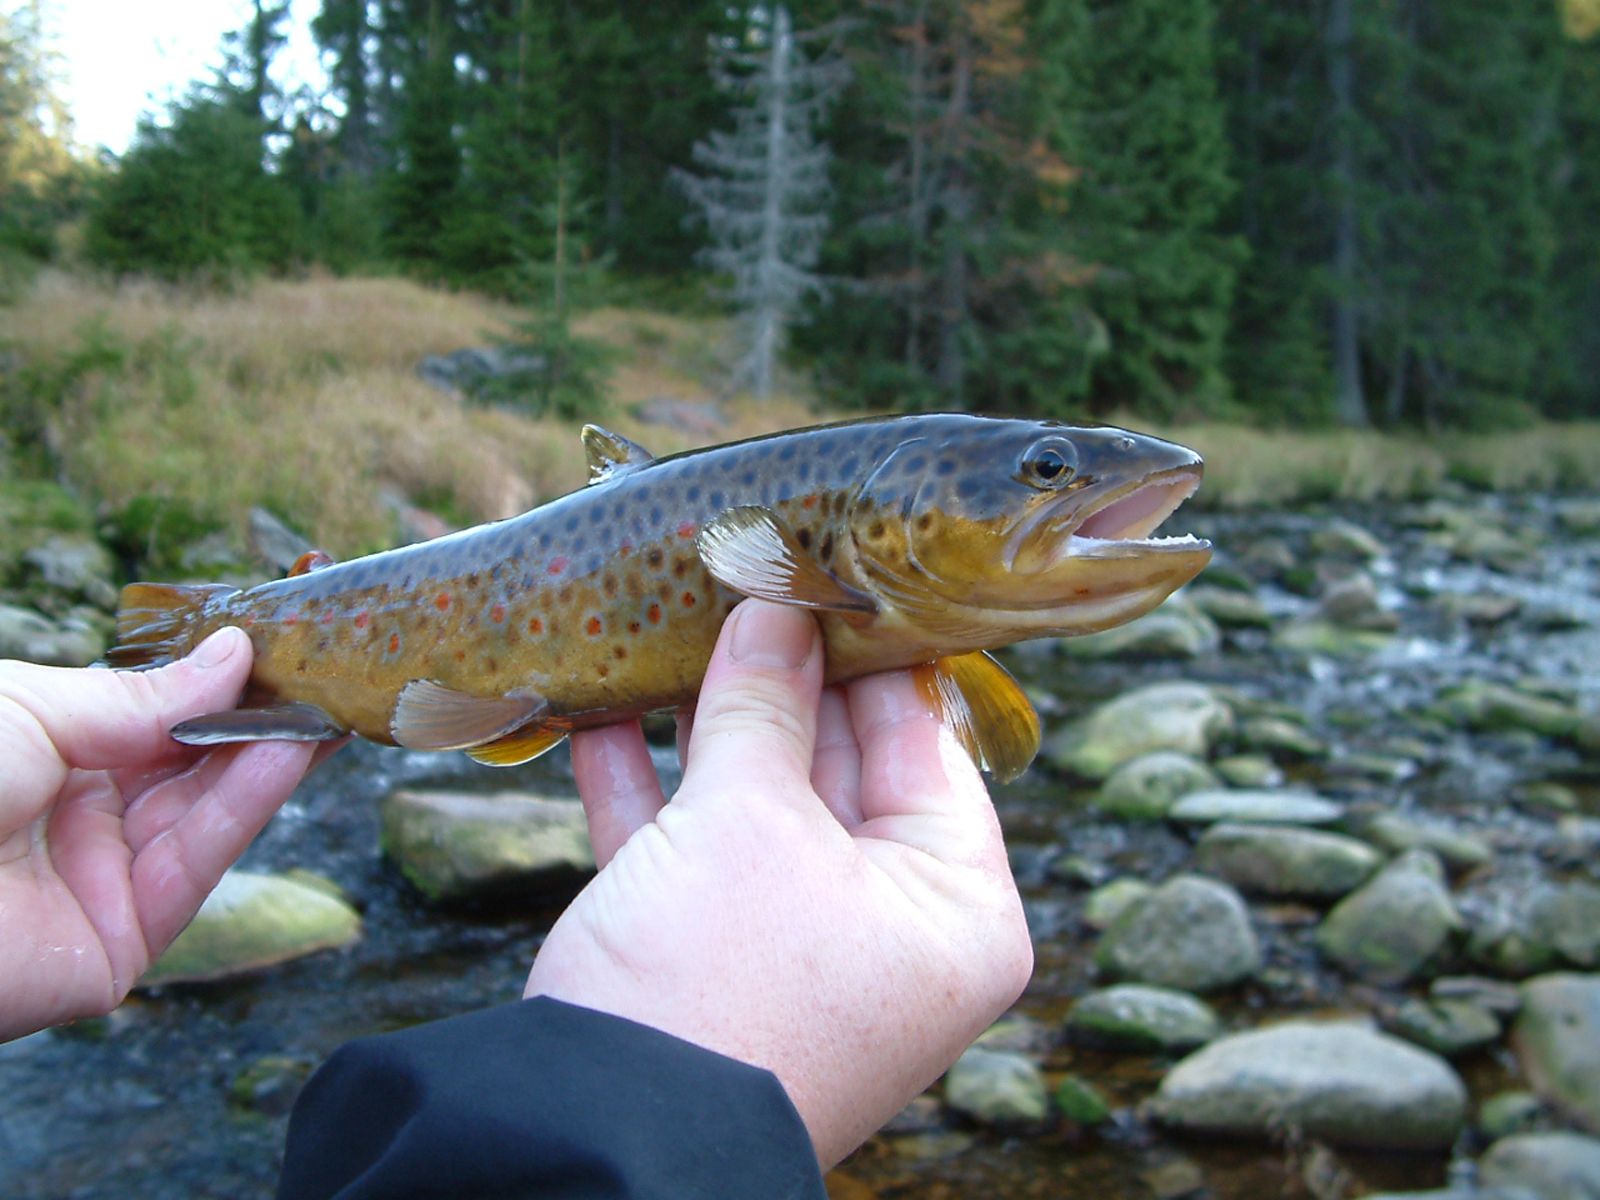 Methamphetamine in waterways may be turning trout into addicts